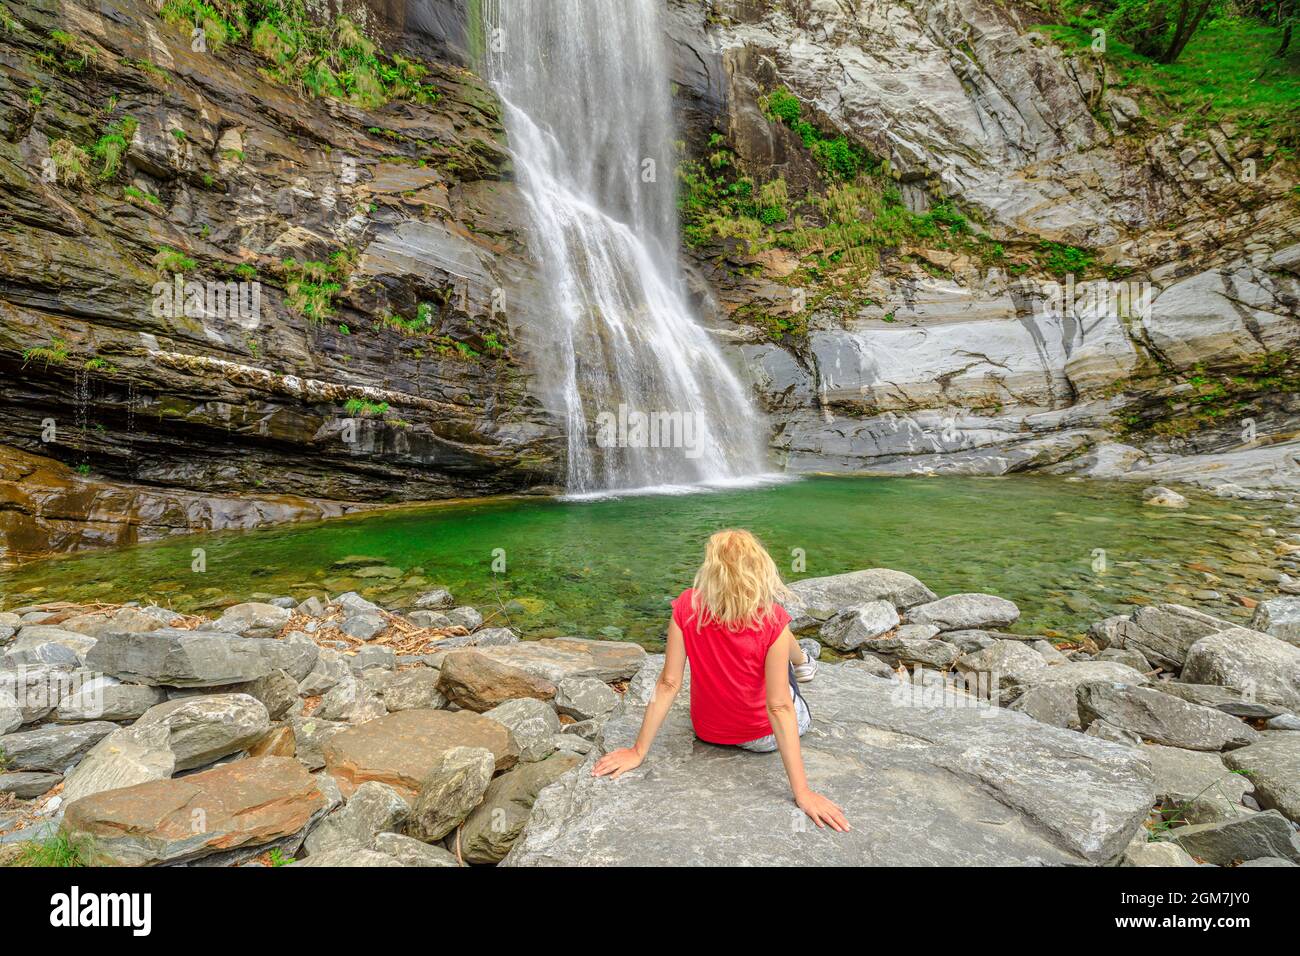 Woman sitting by the water of great waterfall of Bignasco, Valle Maggia, intersection point between the Bavona valley and Lavizzara valley, Cevio in Stock Photo